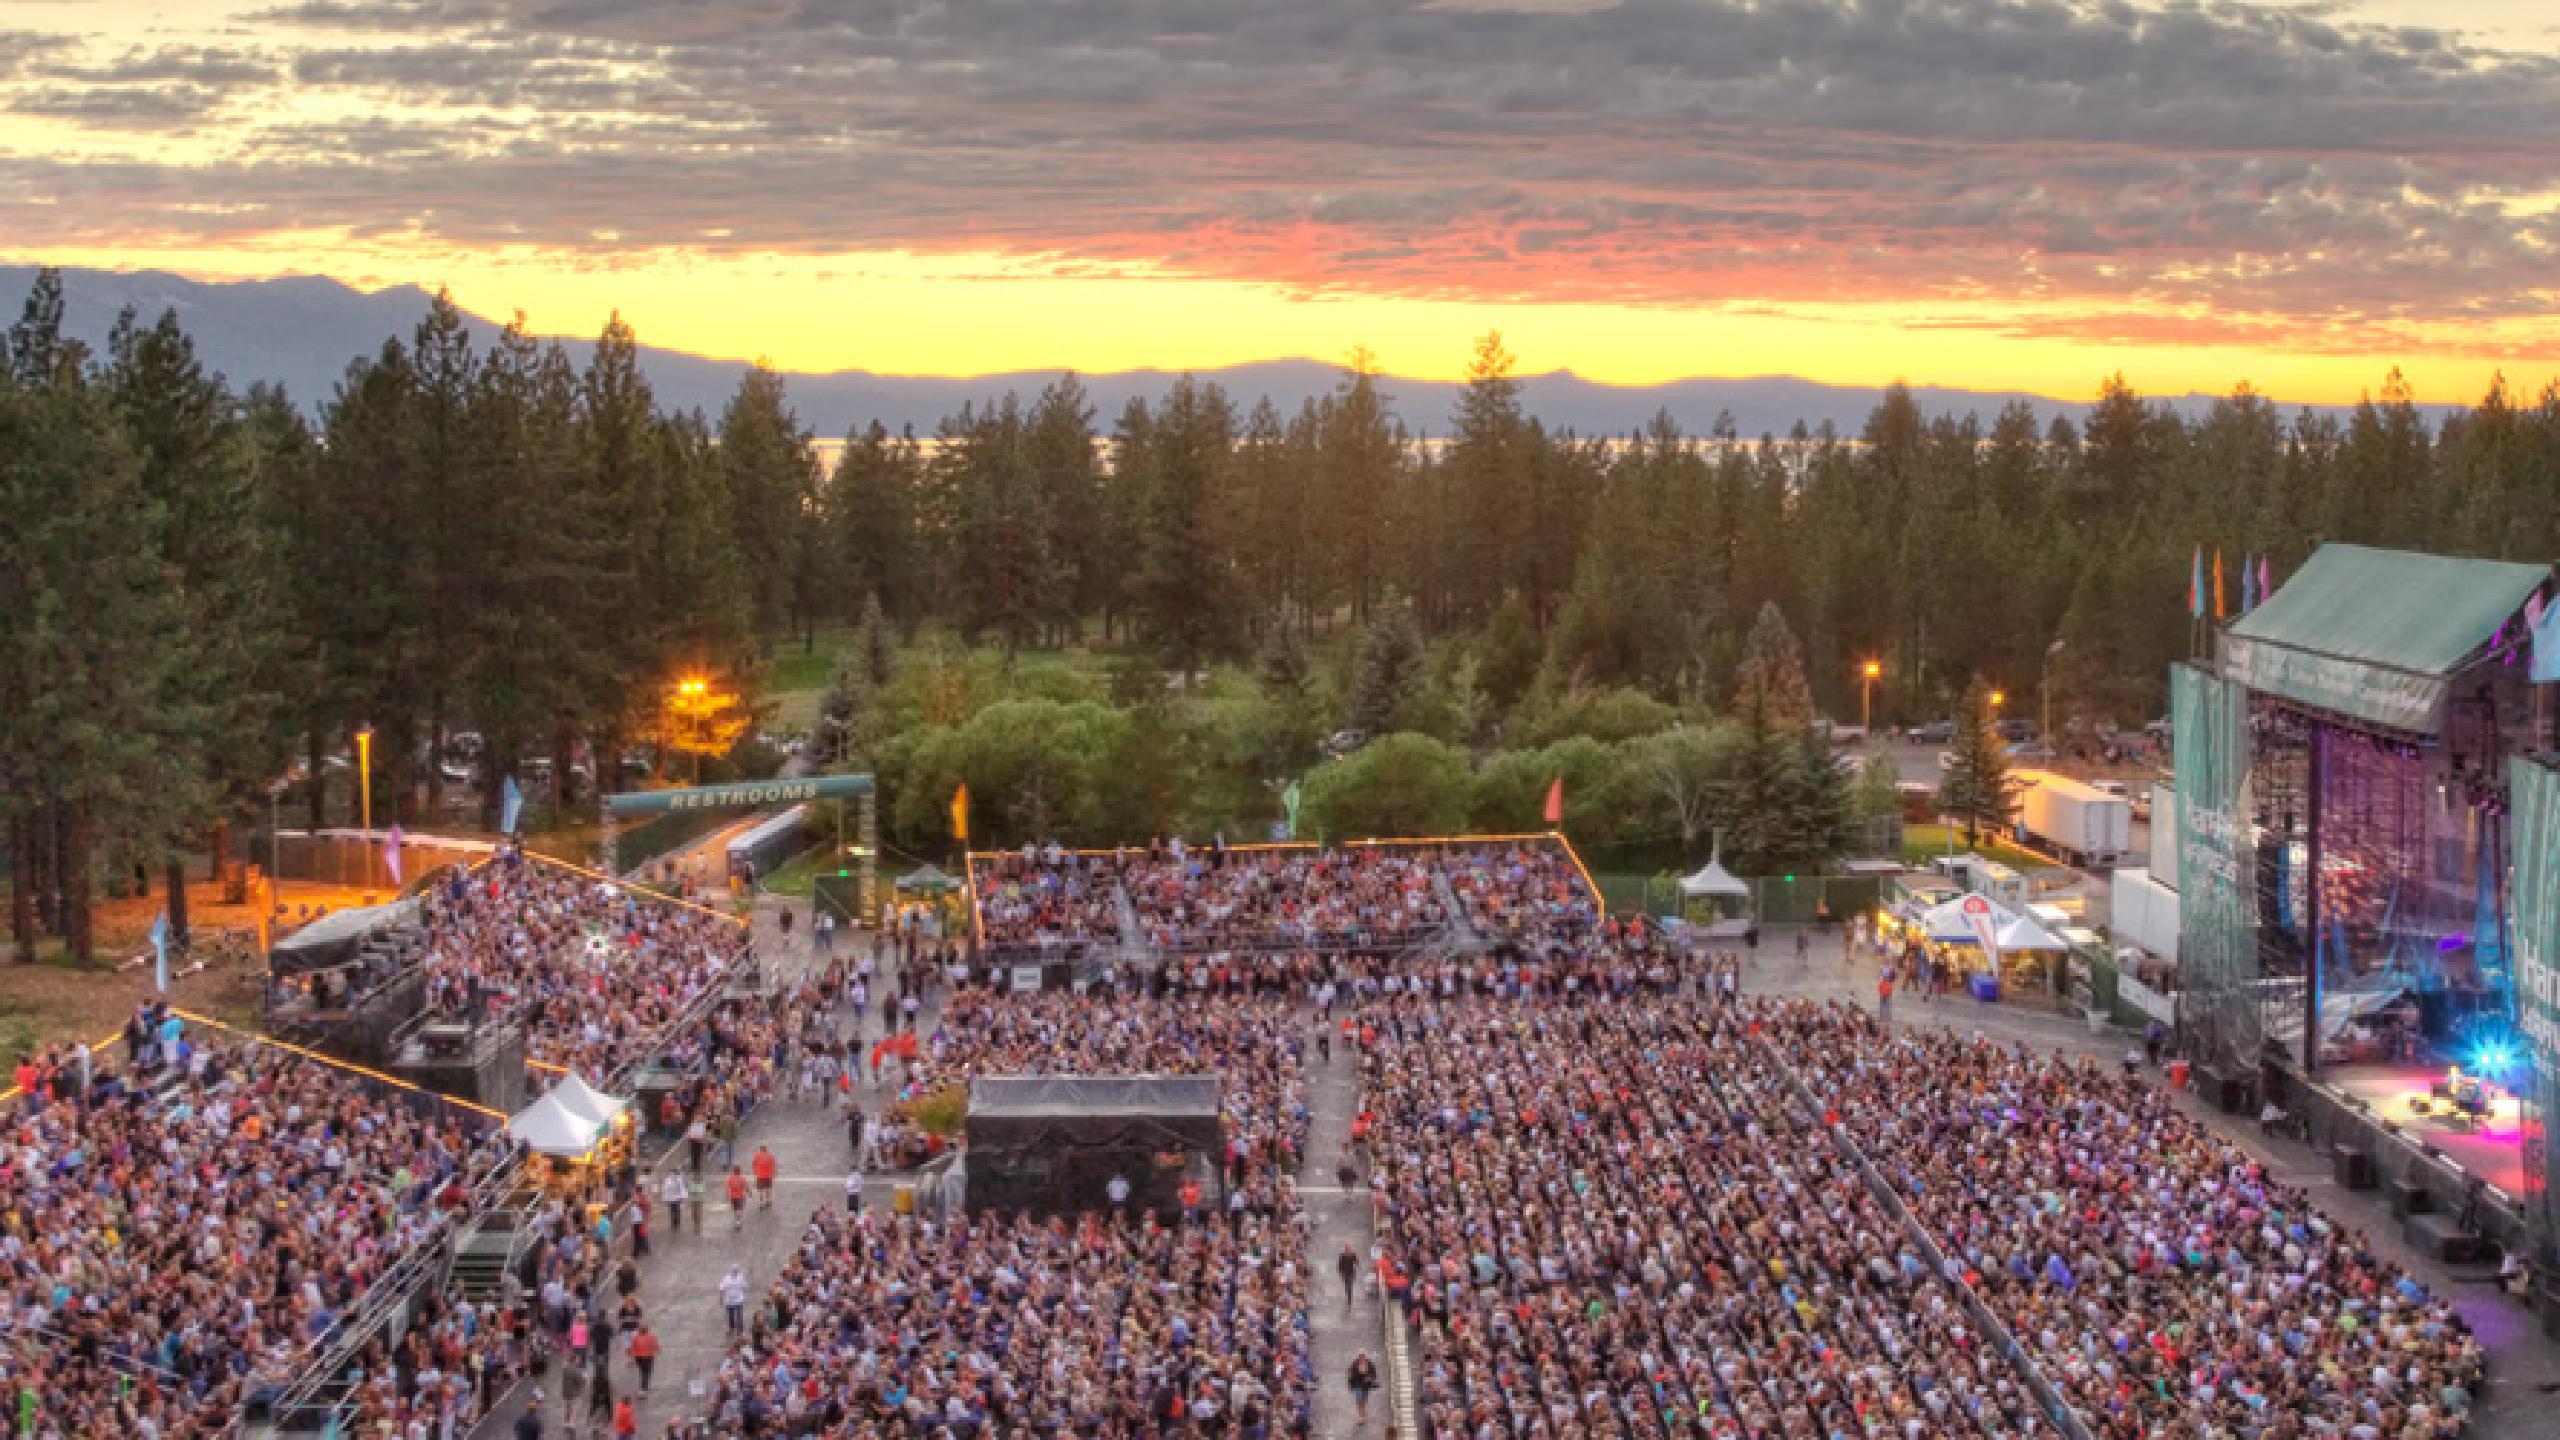 Harvey's Outdoor Arena - Lake Tahoe NV tickets and concerts 2020 2021 |  Wegow